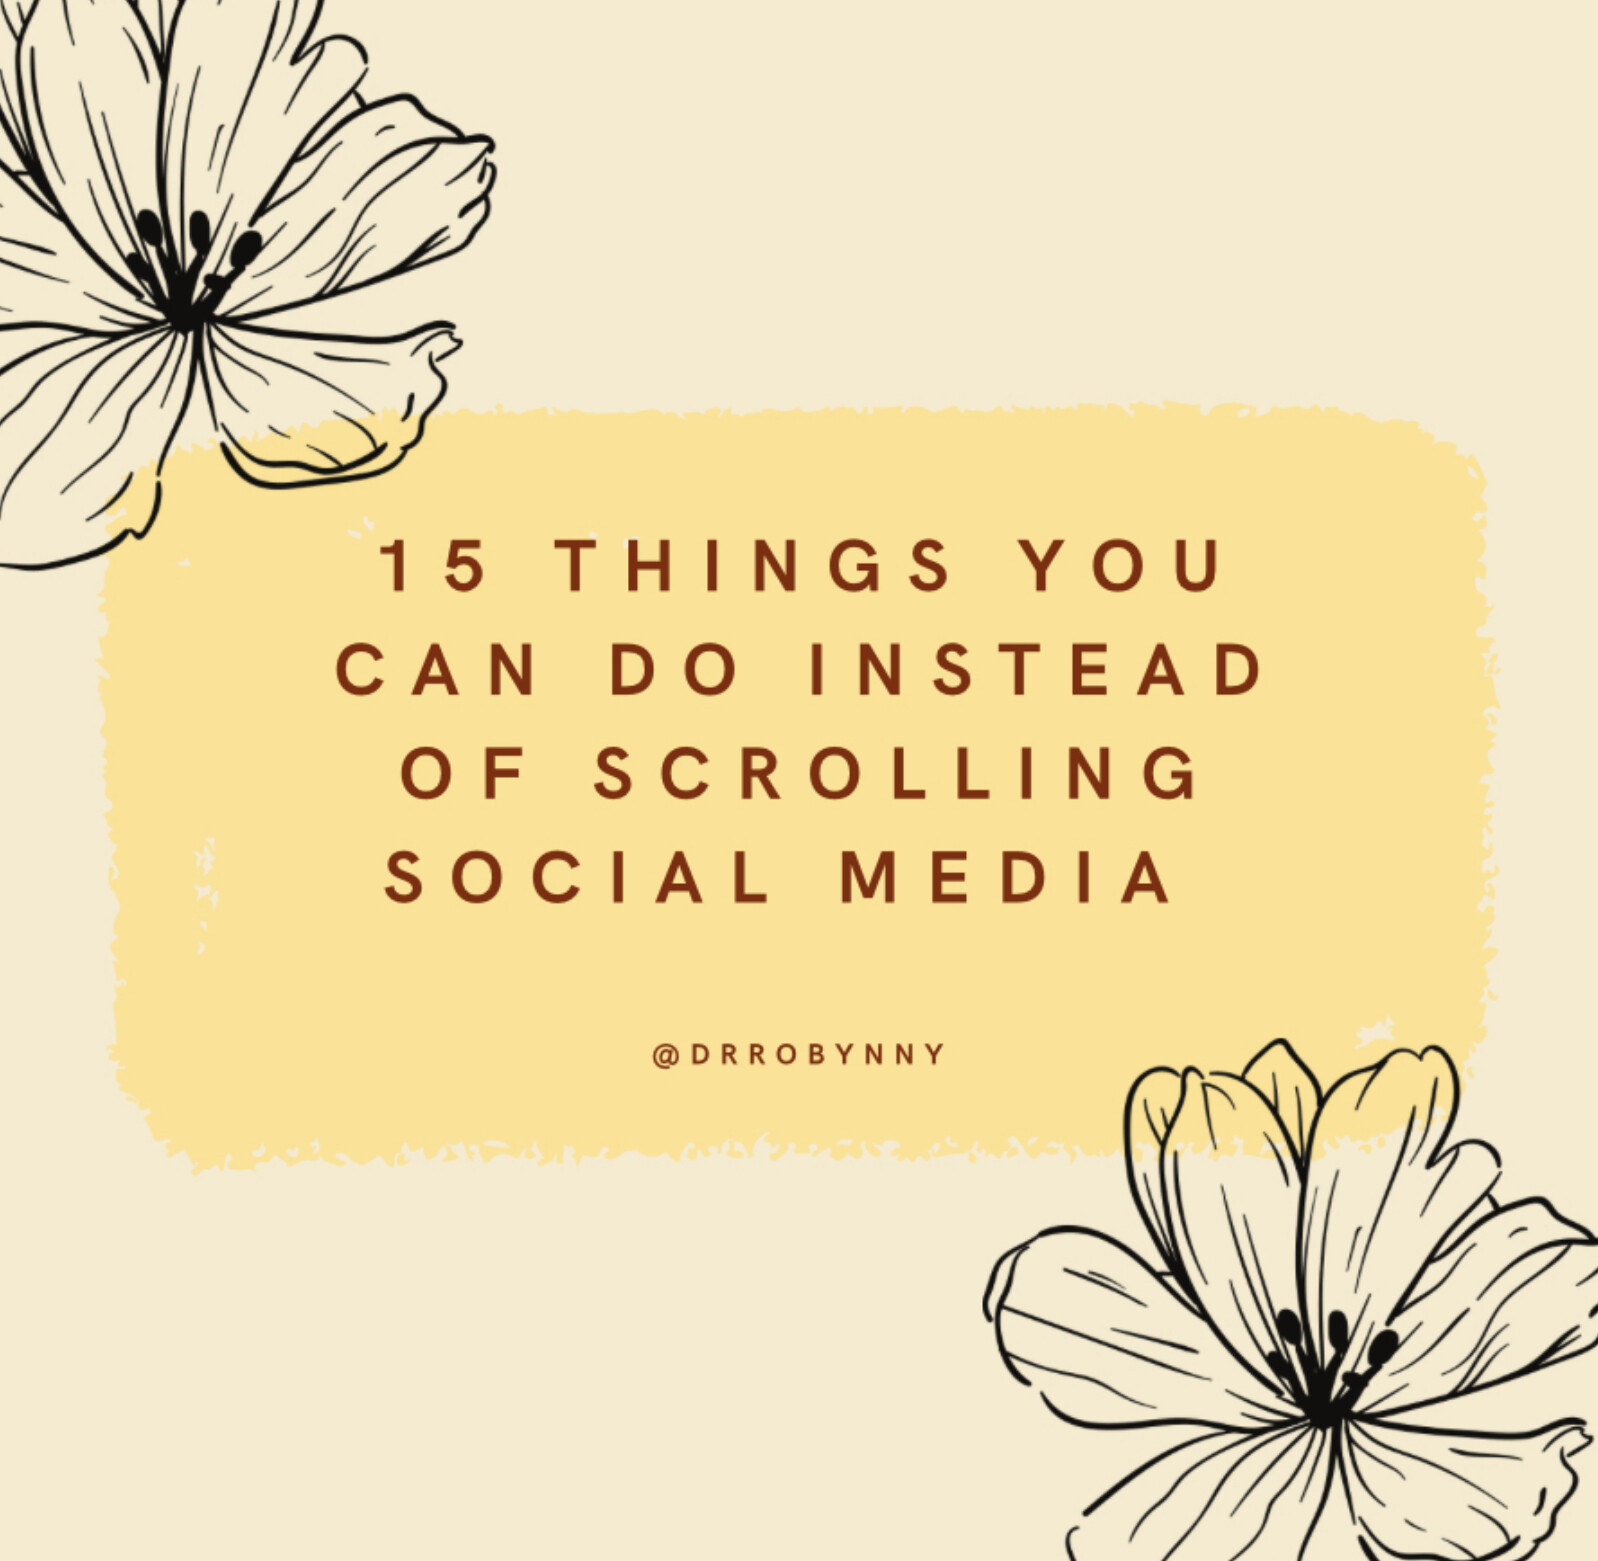 15 Things to do instead of Social Media